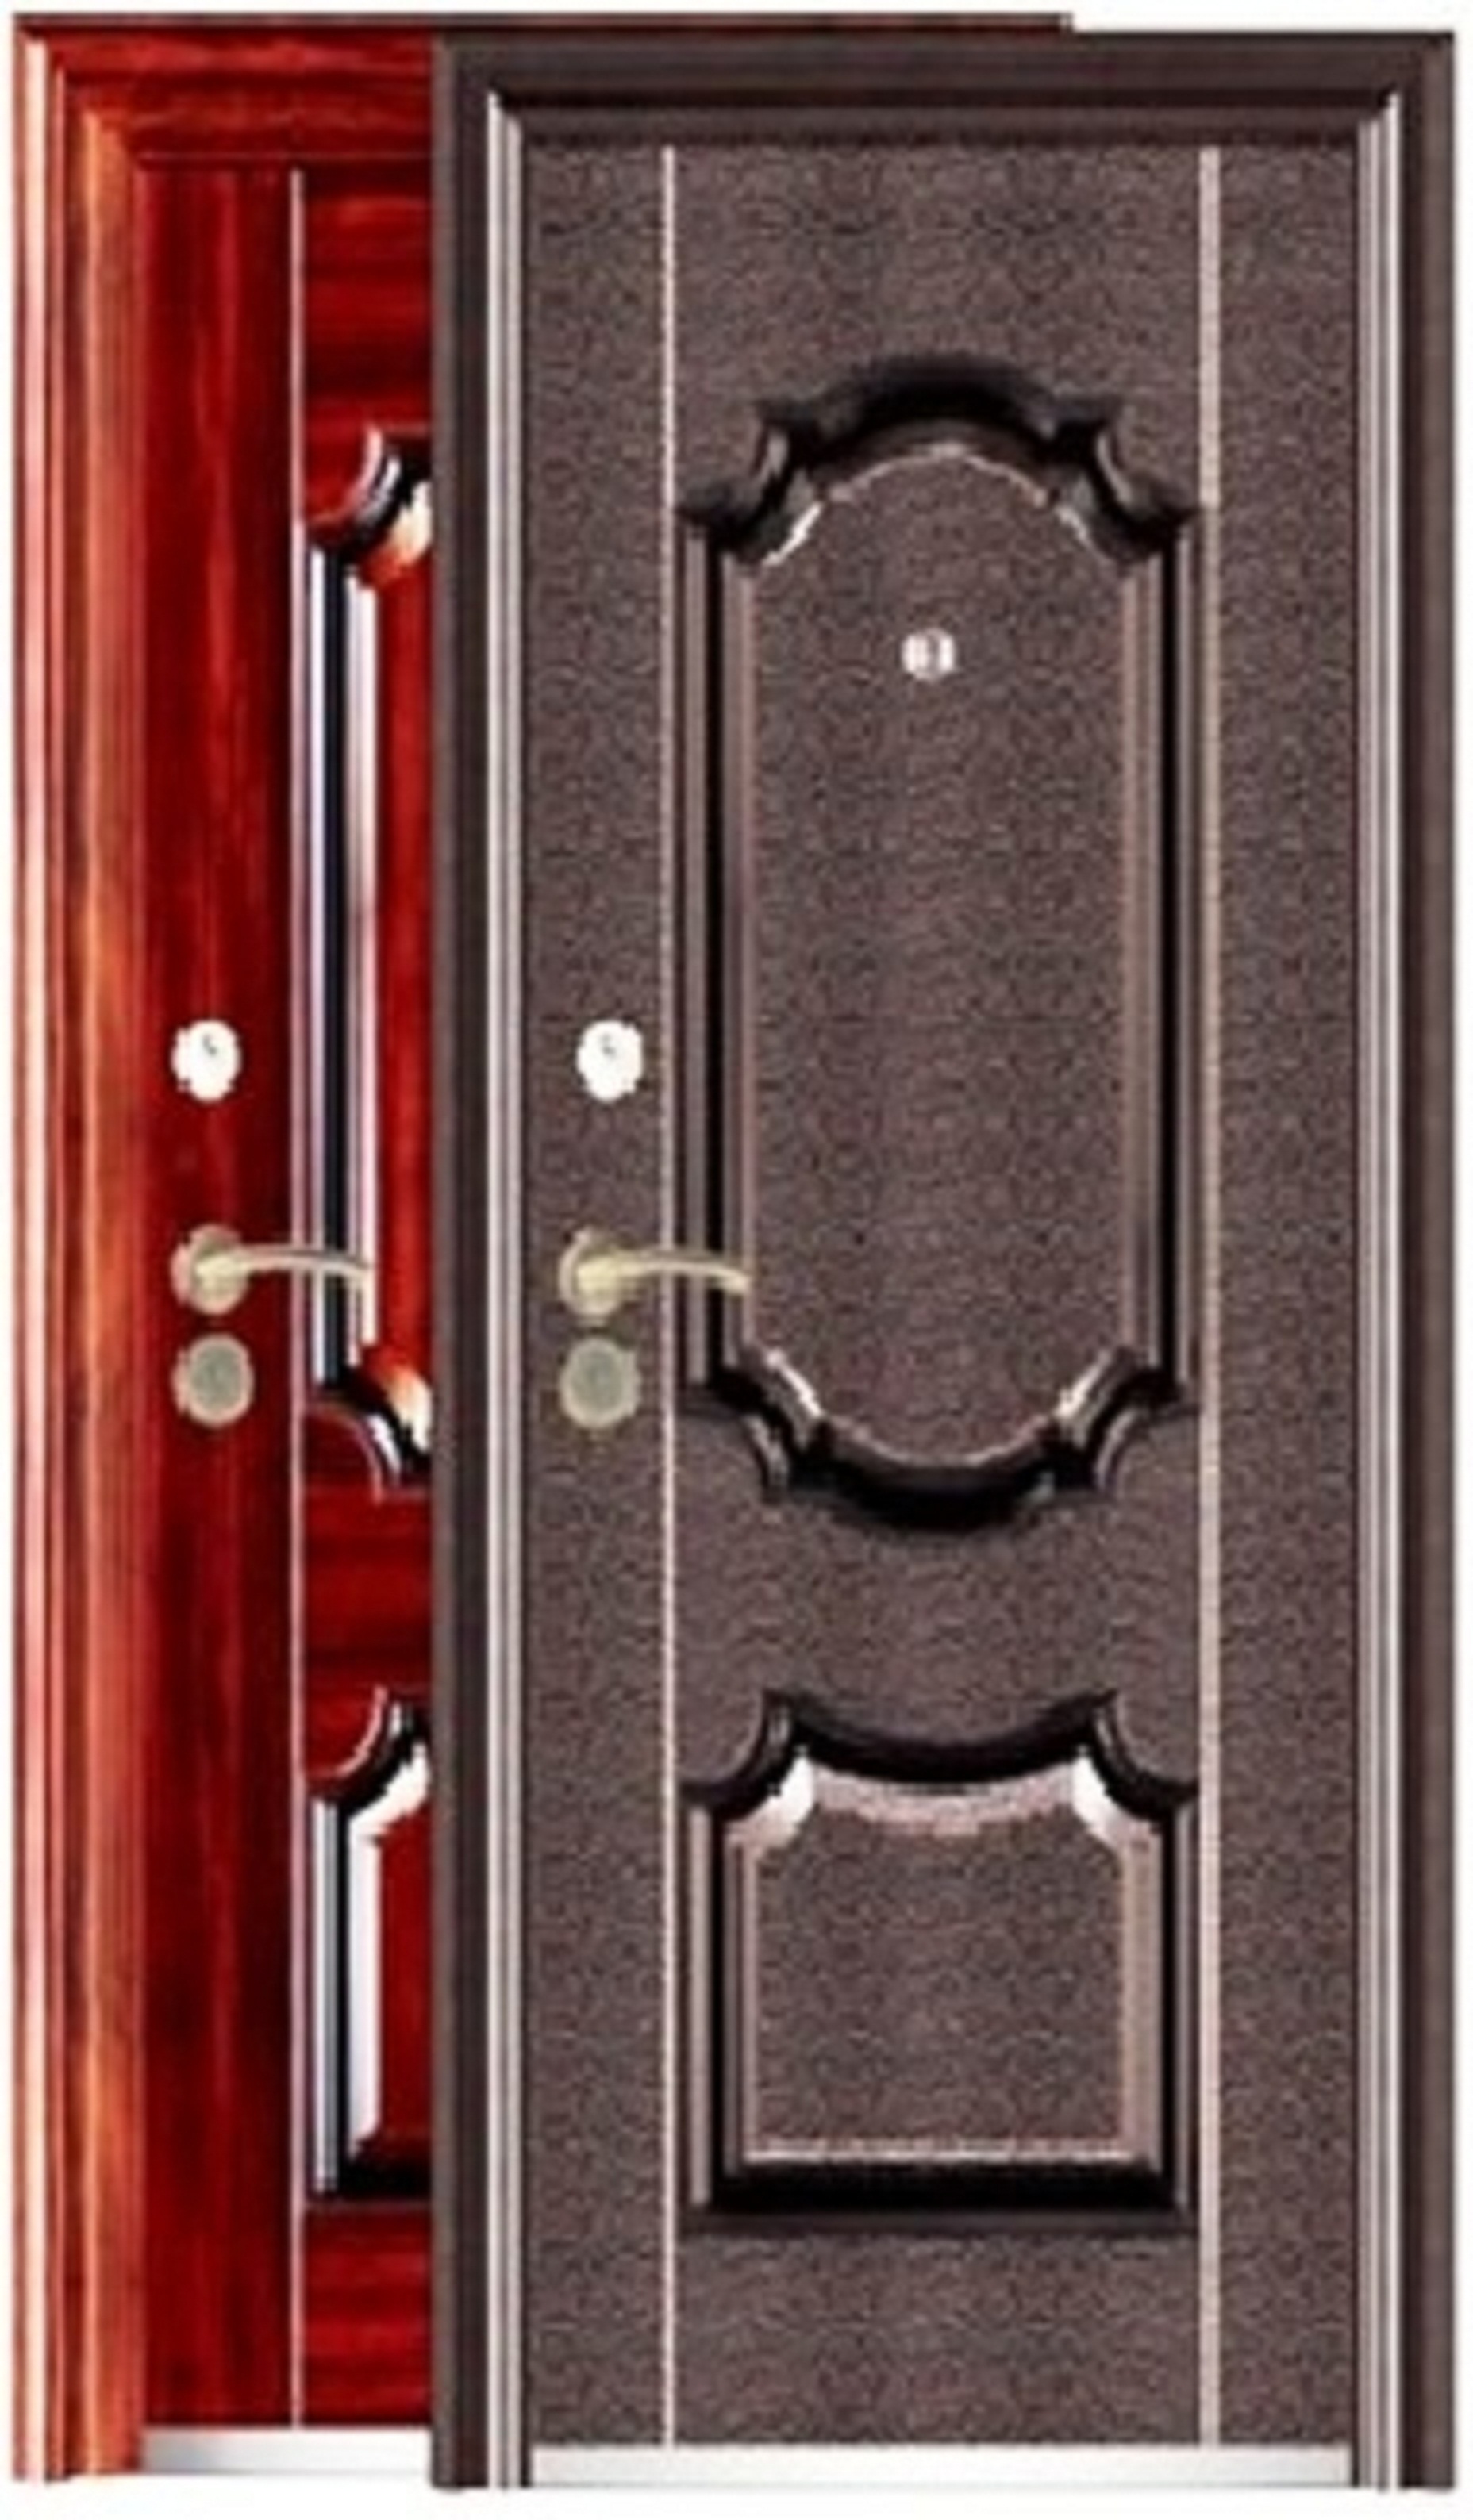 EXCLUSIVE STEEL DOORS : 
high quality steel door of each weighing minimum 65 kg with frame with wooden finish and looks. There are variety of products available so for more detail plz contacts us or else.
Features:
1) Material: cold-rolled steel
2) Thickness of the door leaf: 5cm7cm10cm
3) Frame outer sizes (H x W):
a) 2,050 x 960mm
b) 2,050 x 860mm
c) 1,970 x 860mm
d) 1,970 x 960mm
4) Accessories: adjustable reinforced hinges, specialty multi-point lock, handles,
peephole, hidden doorbell, rubber seal and magnetic seal, doorbell, installing
bolts, stainless steel threshold
5) Infilling: honeycomb material
6) Opening direction: inward  outward
7) Opening degree: 90 degrees, 180 degrees
8) Lock handle position: on left  on right
9) Colors: diversified colors available
10) Applicable for the entrance of houses or flats
11) Can also be used as room door
12) Suitable for different wall thickness
13) Shockproof, soundproof, warmth preserved, anti-pry, anti-drill, moisture proof,
guards against theft
14) Environmentally friendly
15) Bright, lustrous and durable appearance
16) OEM service available
